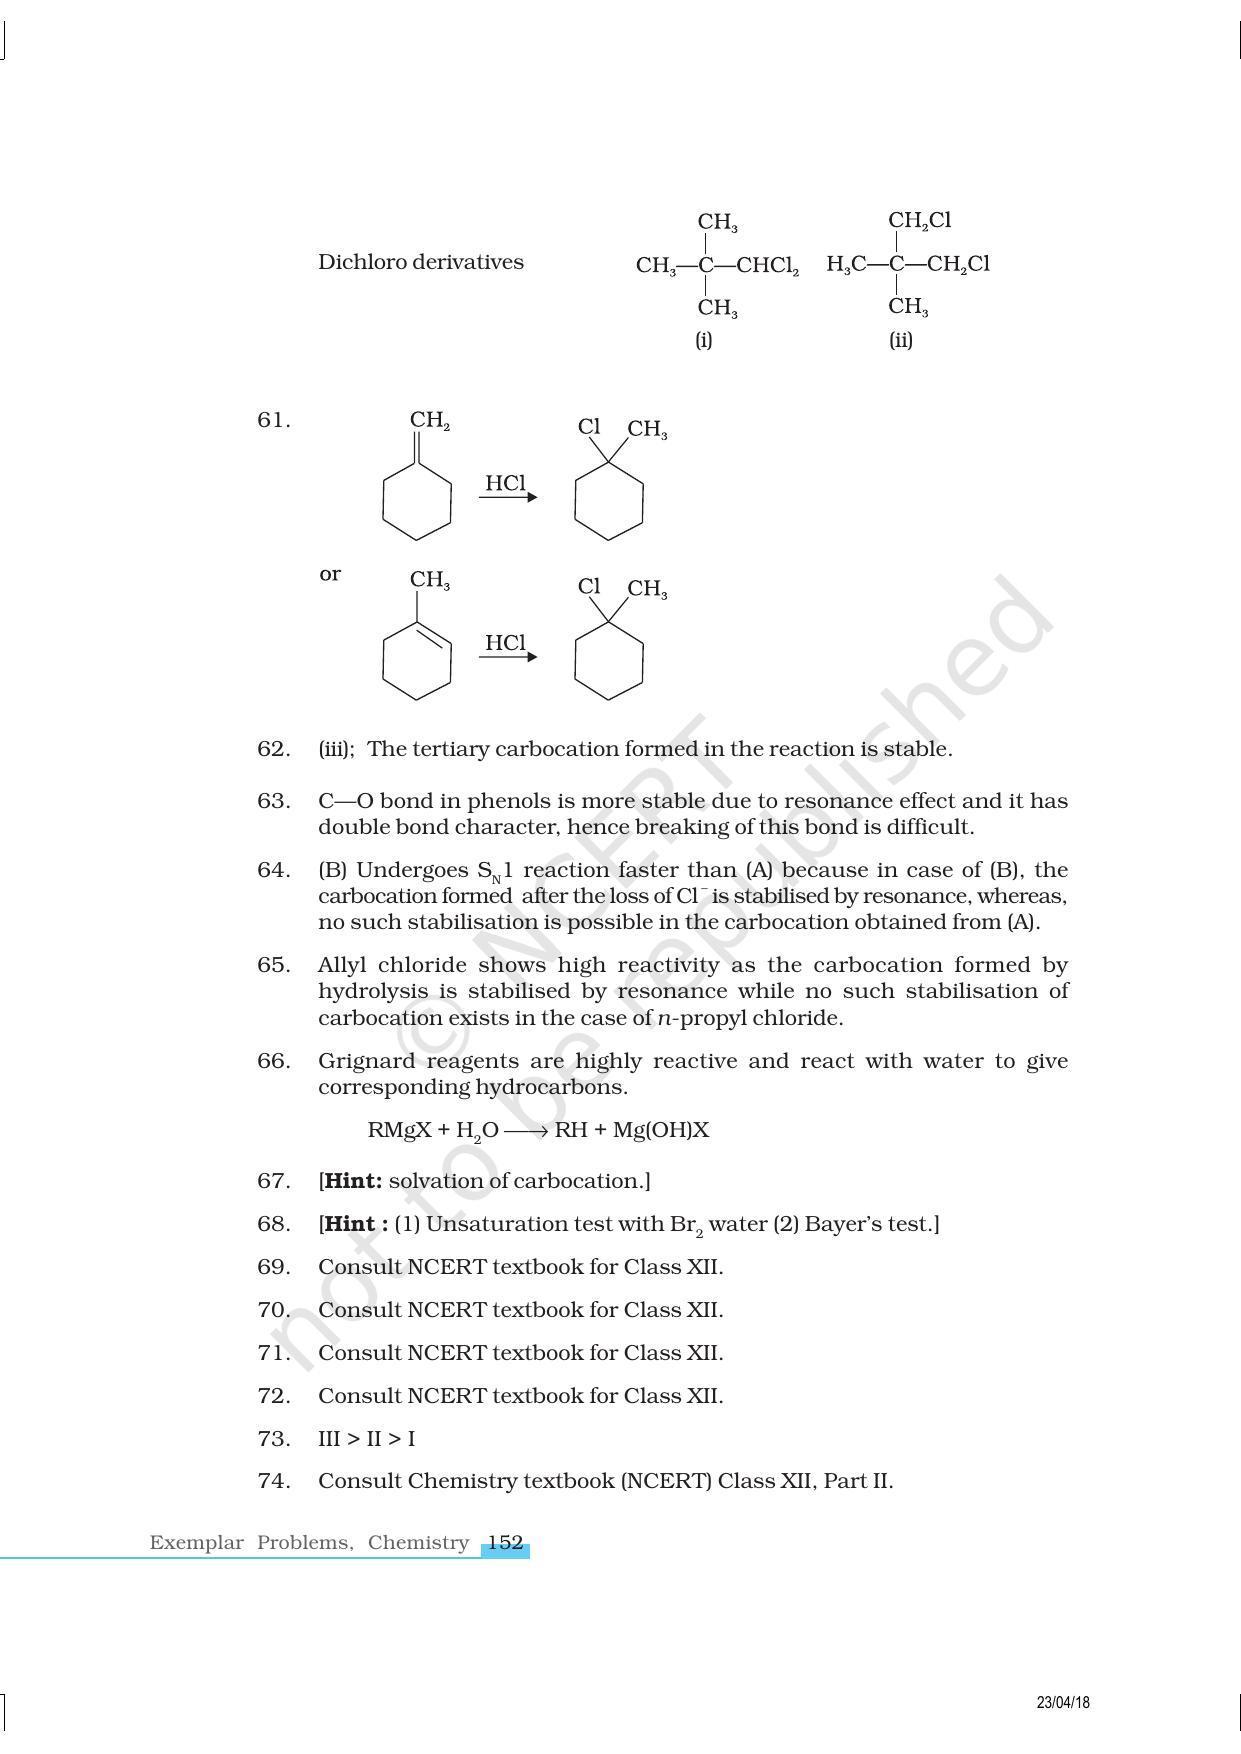 NCERT Exemplar Book for Class 12 Chemistry: Chapter 10 Haloalkanes and Haloarenes - Page 20